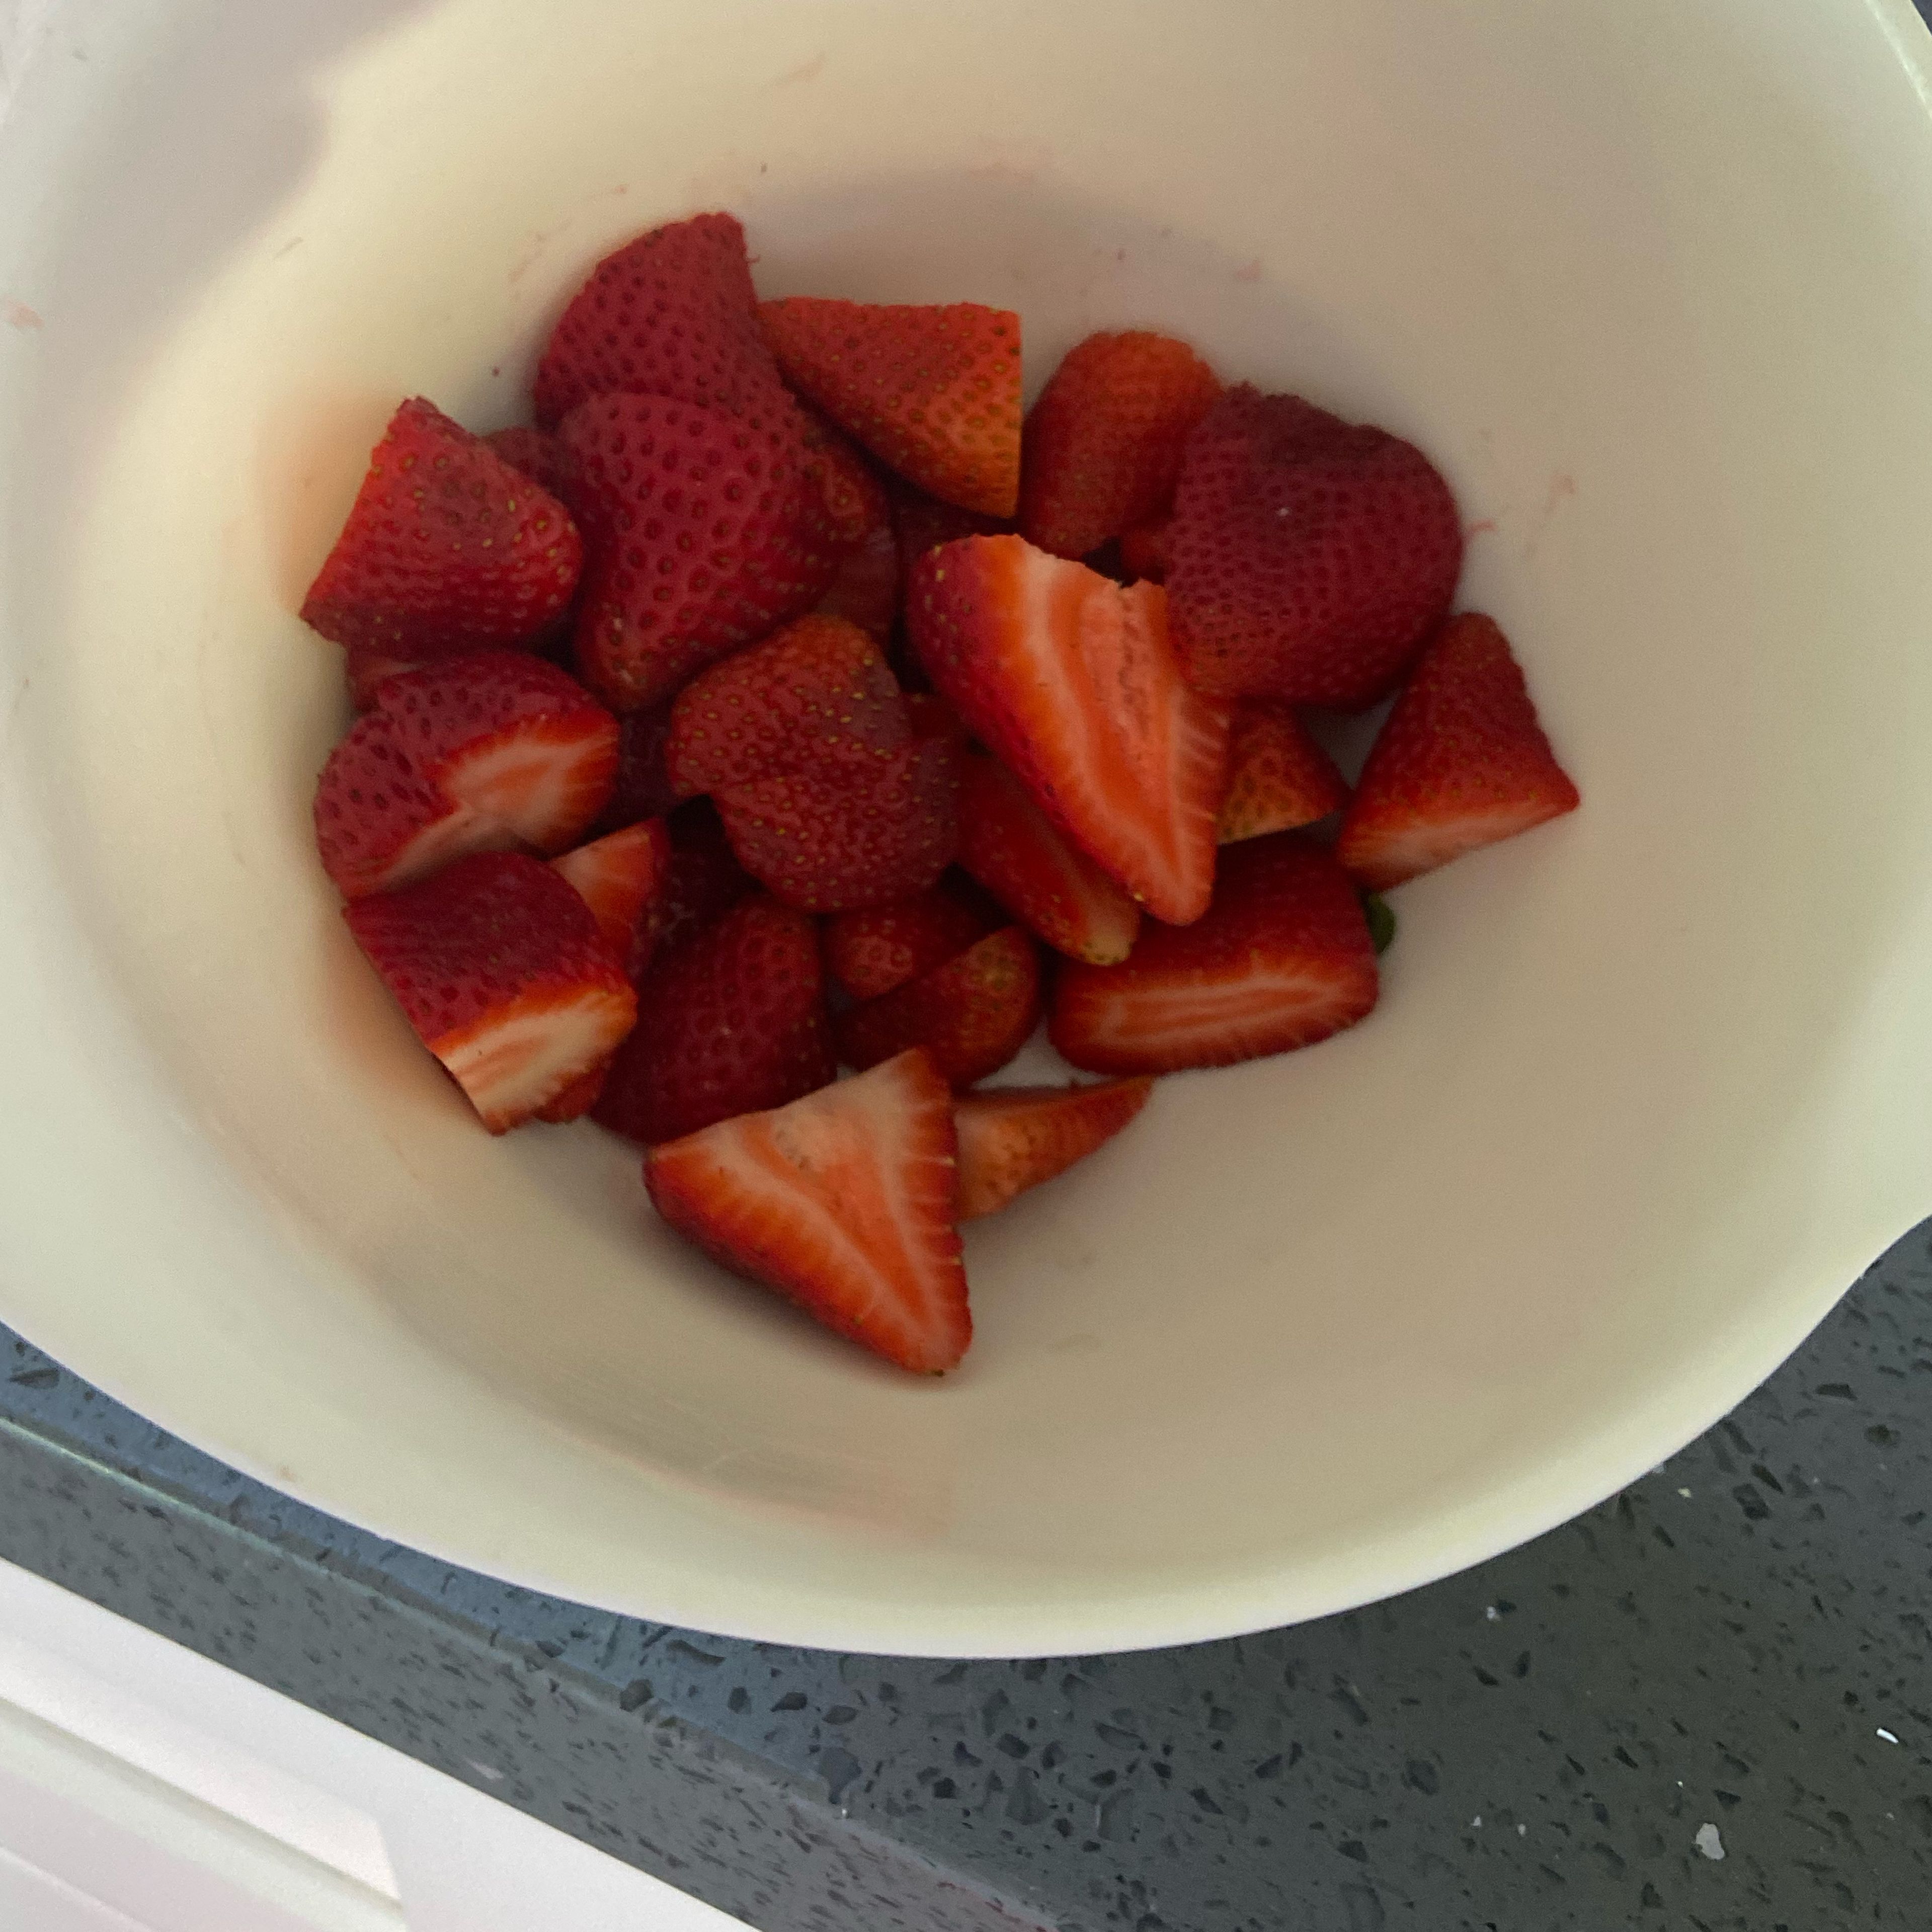 Pour the strawberries into a bowl